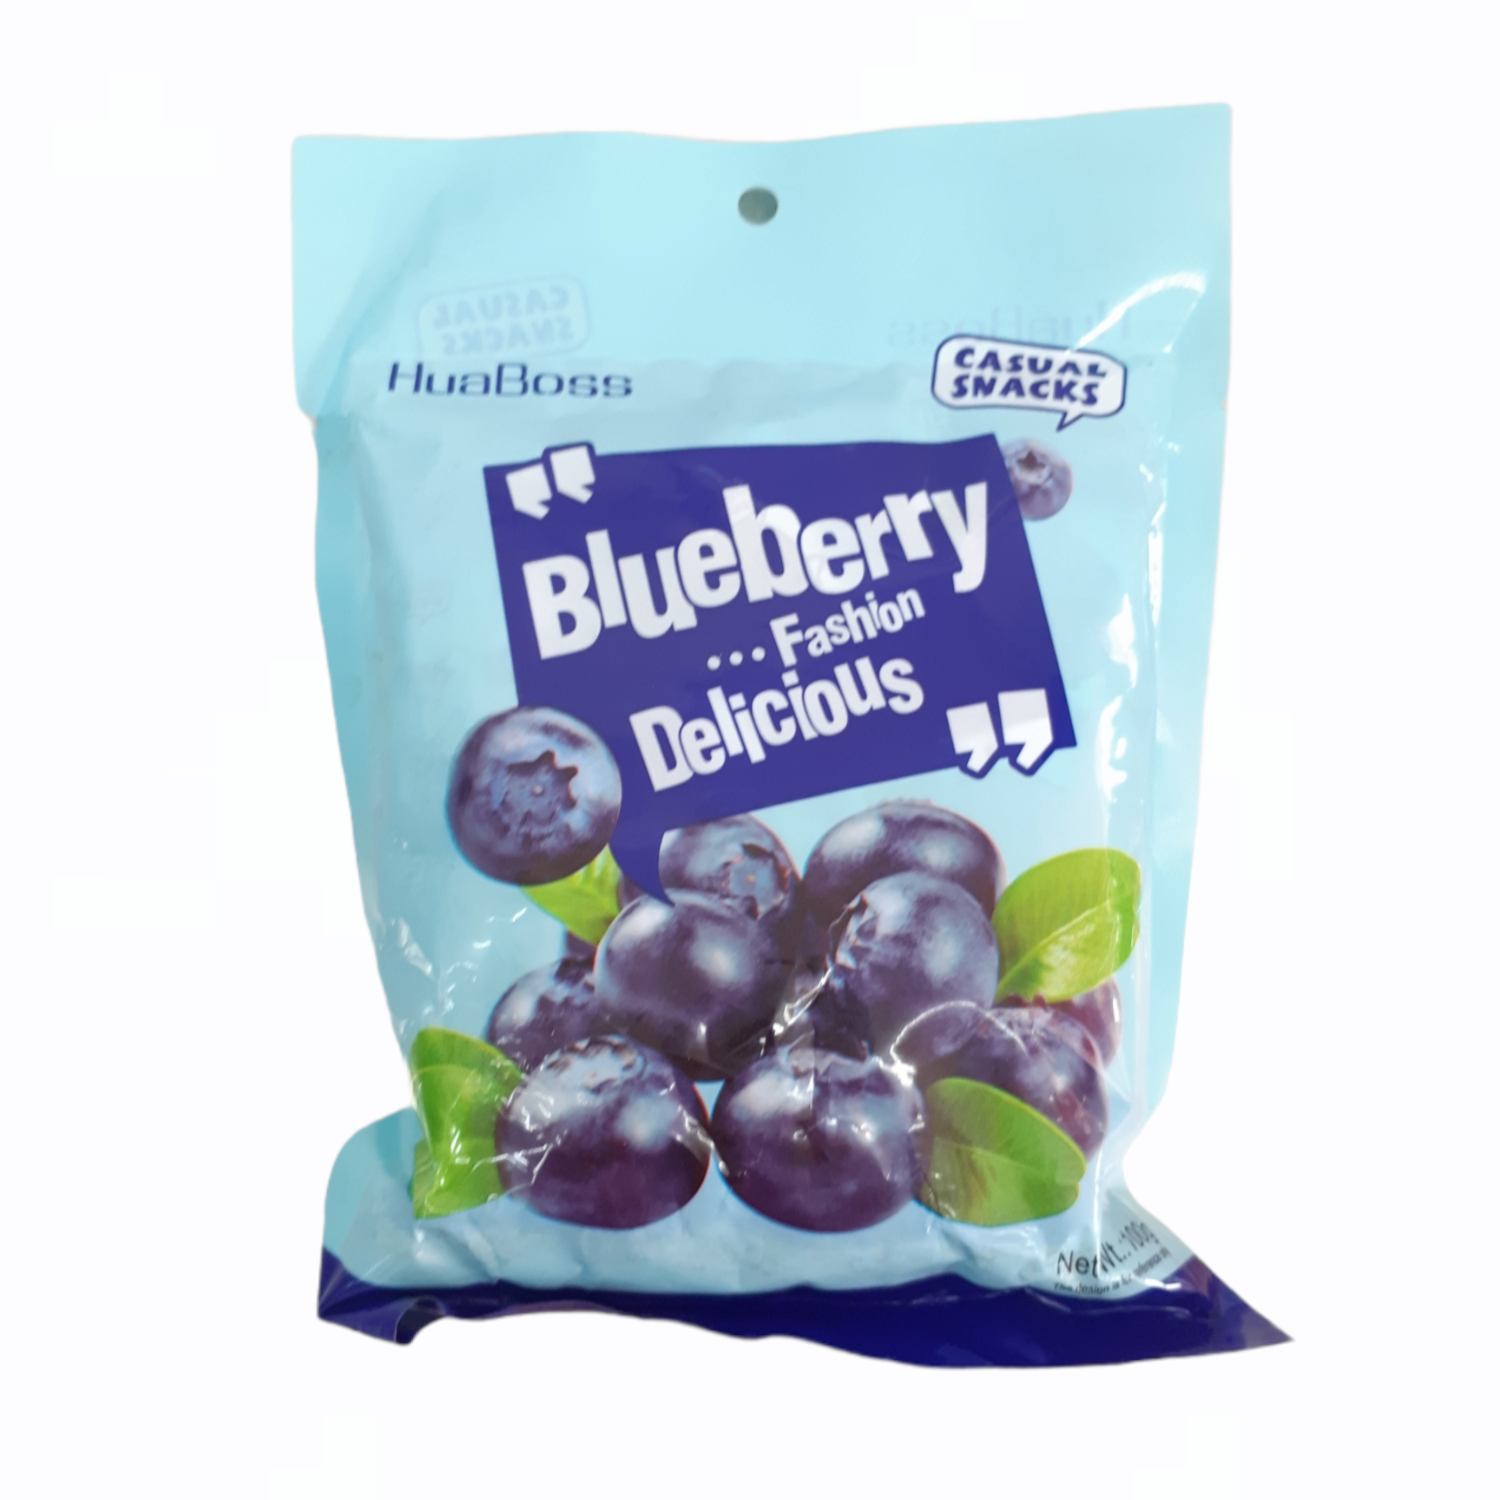 Blueberry sấy - Delicious 100g